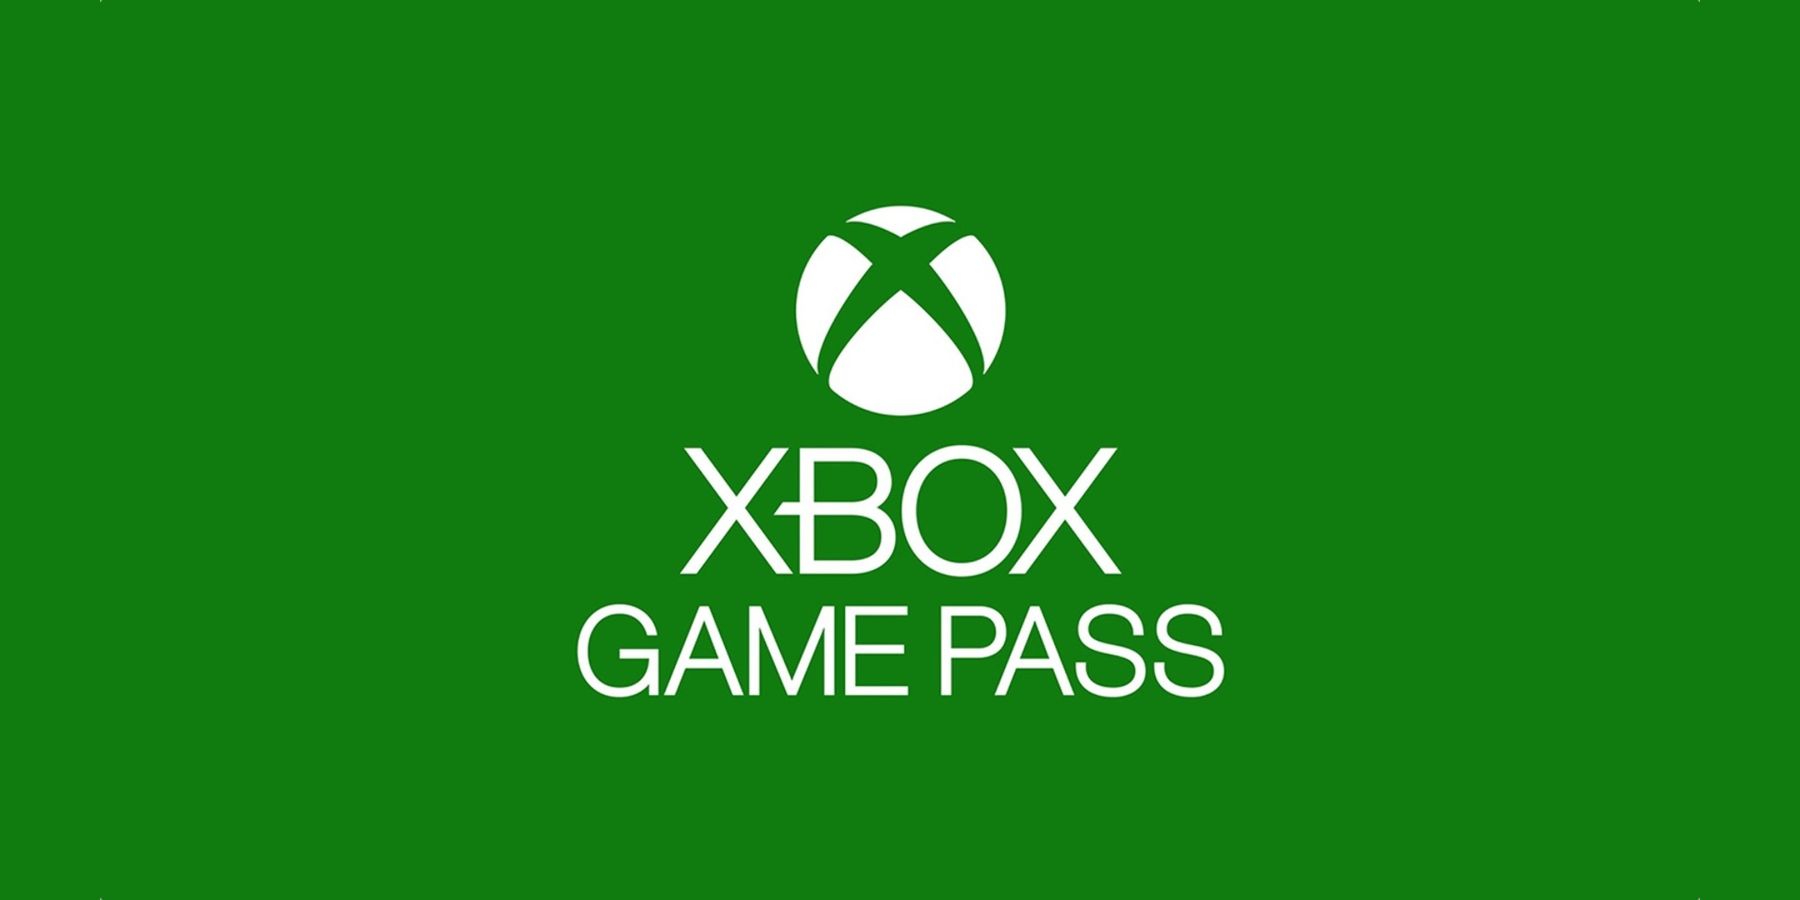 During ~ Prefix But Some Xbox Insiders Are Testing a Major New Xbox Game Pass Feature